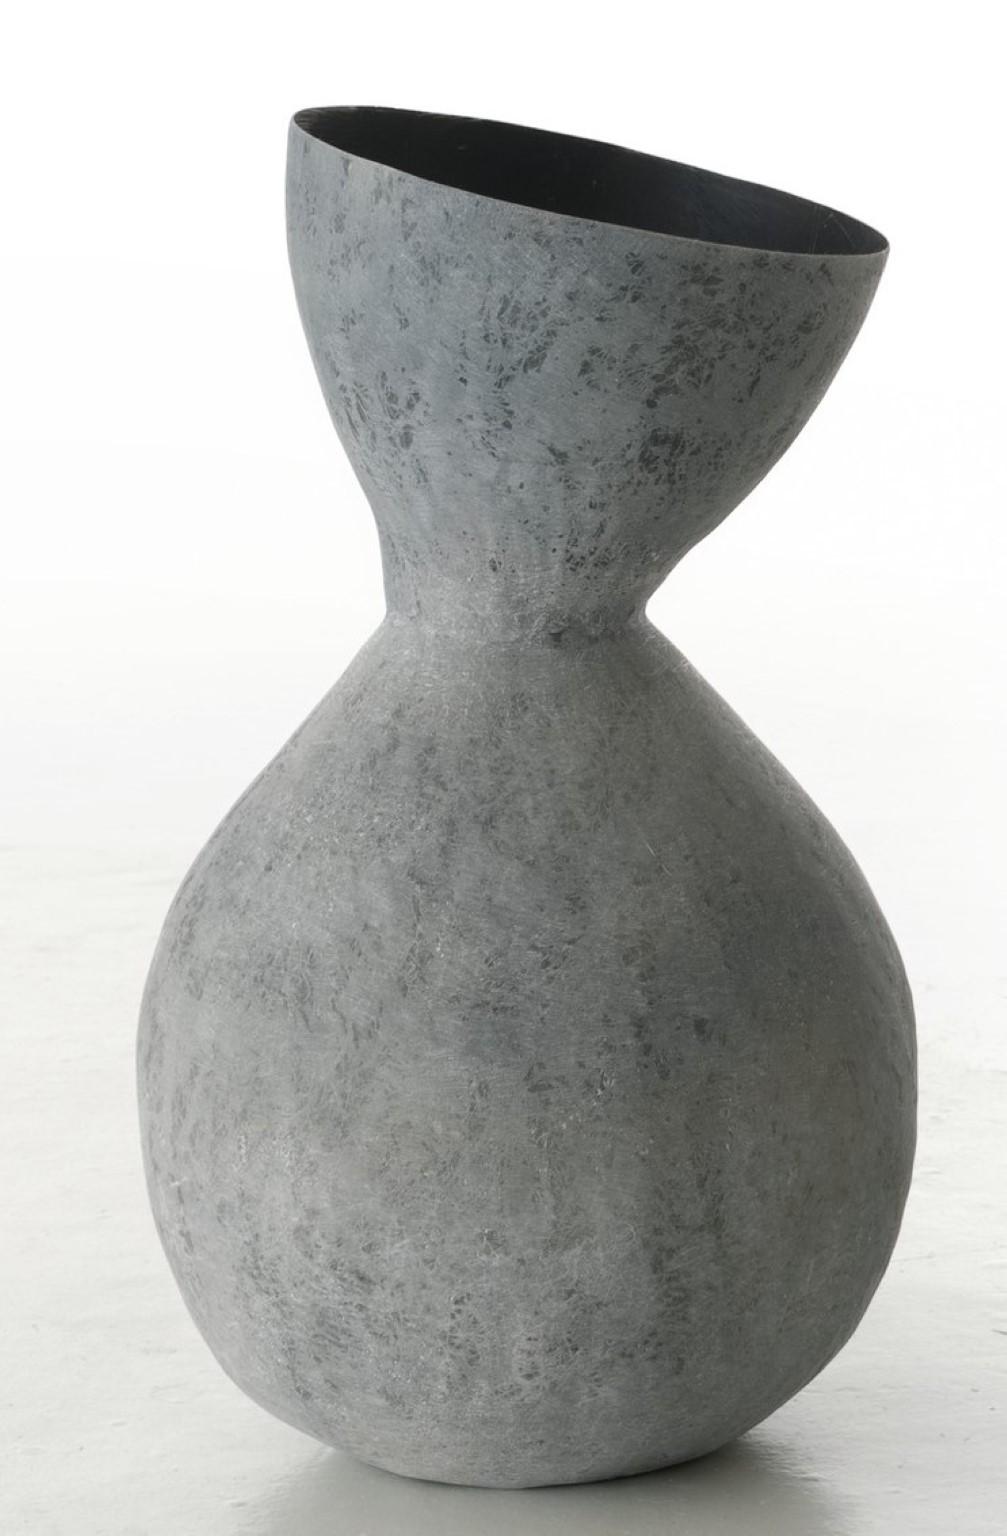 Incline vase by Imperfettolab
Dimensions: Ø 38 x H 67 cm
Materials: Raw material


Imperfetto Lab
Who we are ? We are a family.
Verter Turroni, Emanuela Ravelli and our children Elia, Margherita and Eusebio.
All together, we are separate parts and